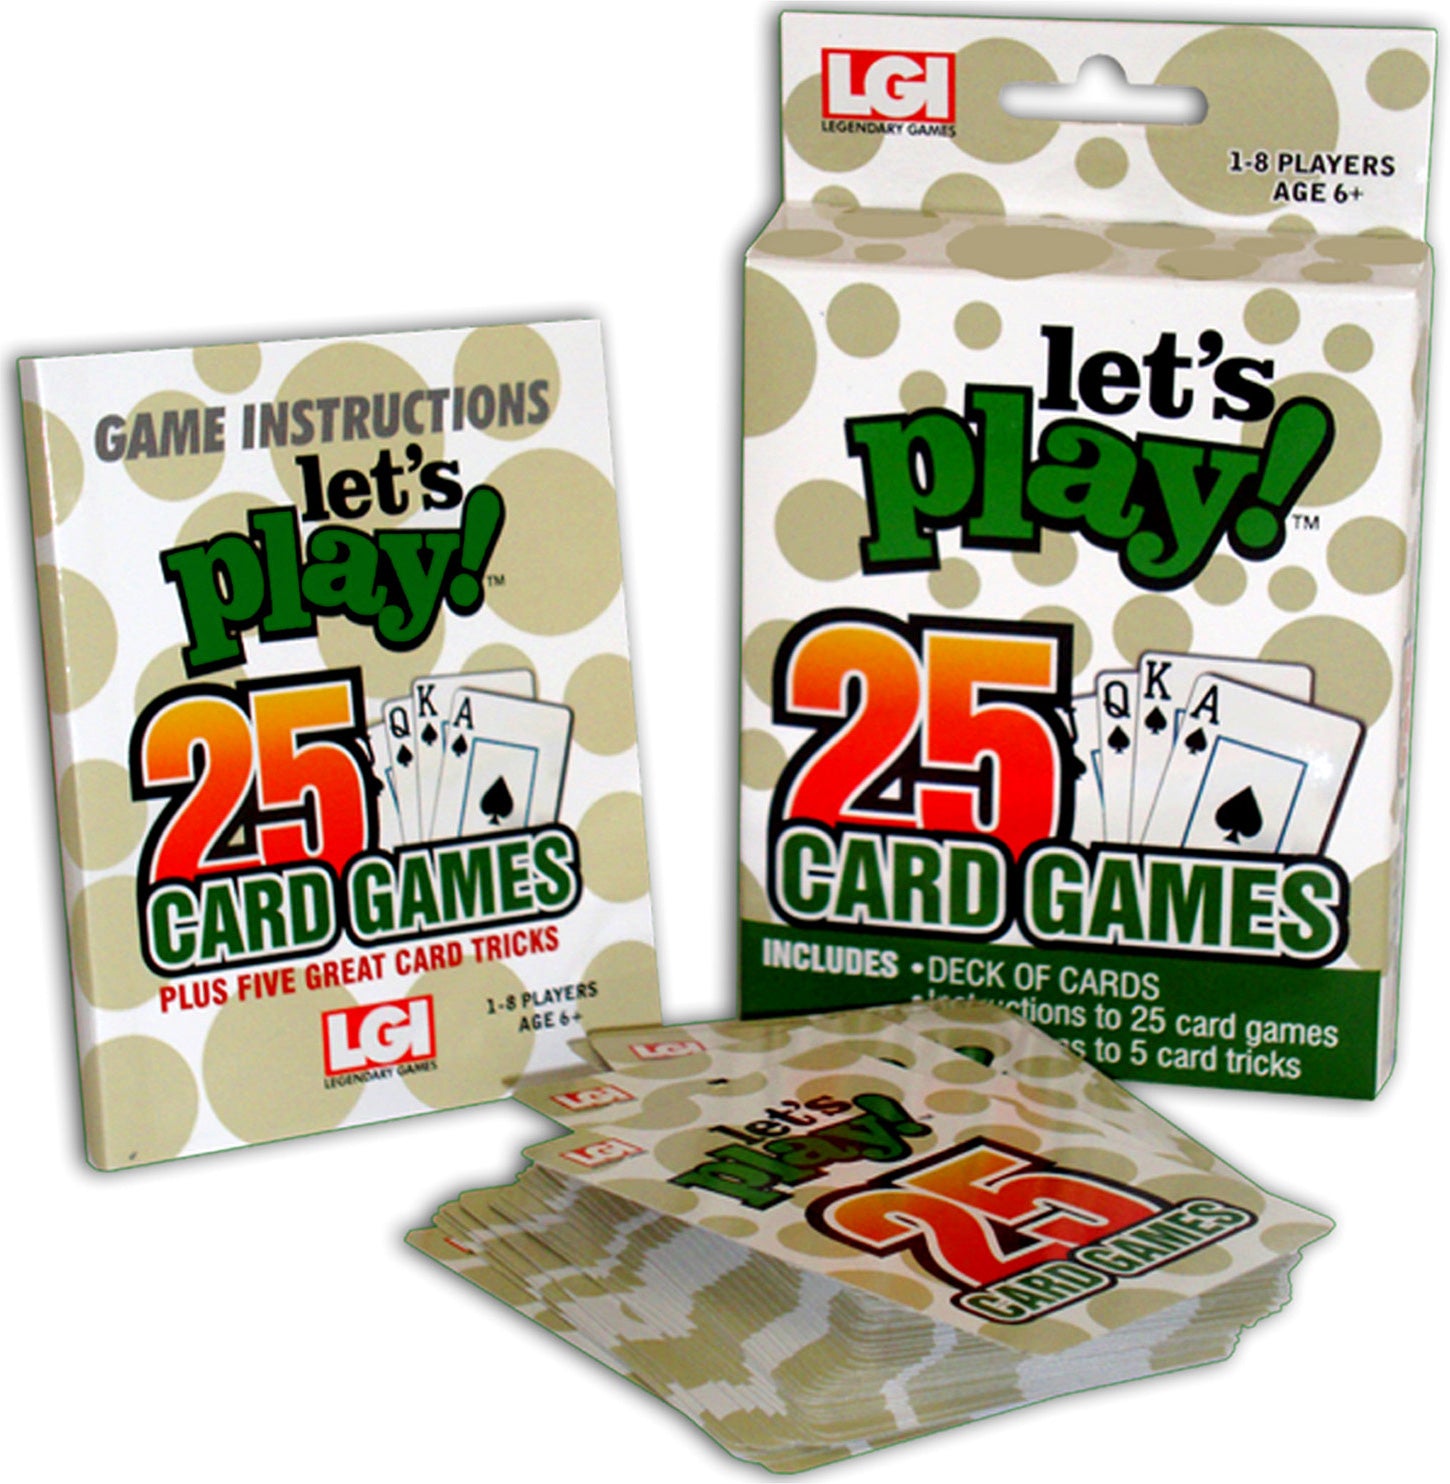 Let's Play! 25 Card Games